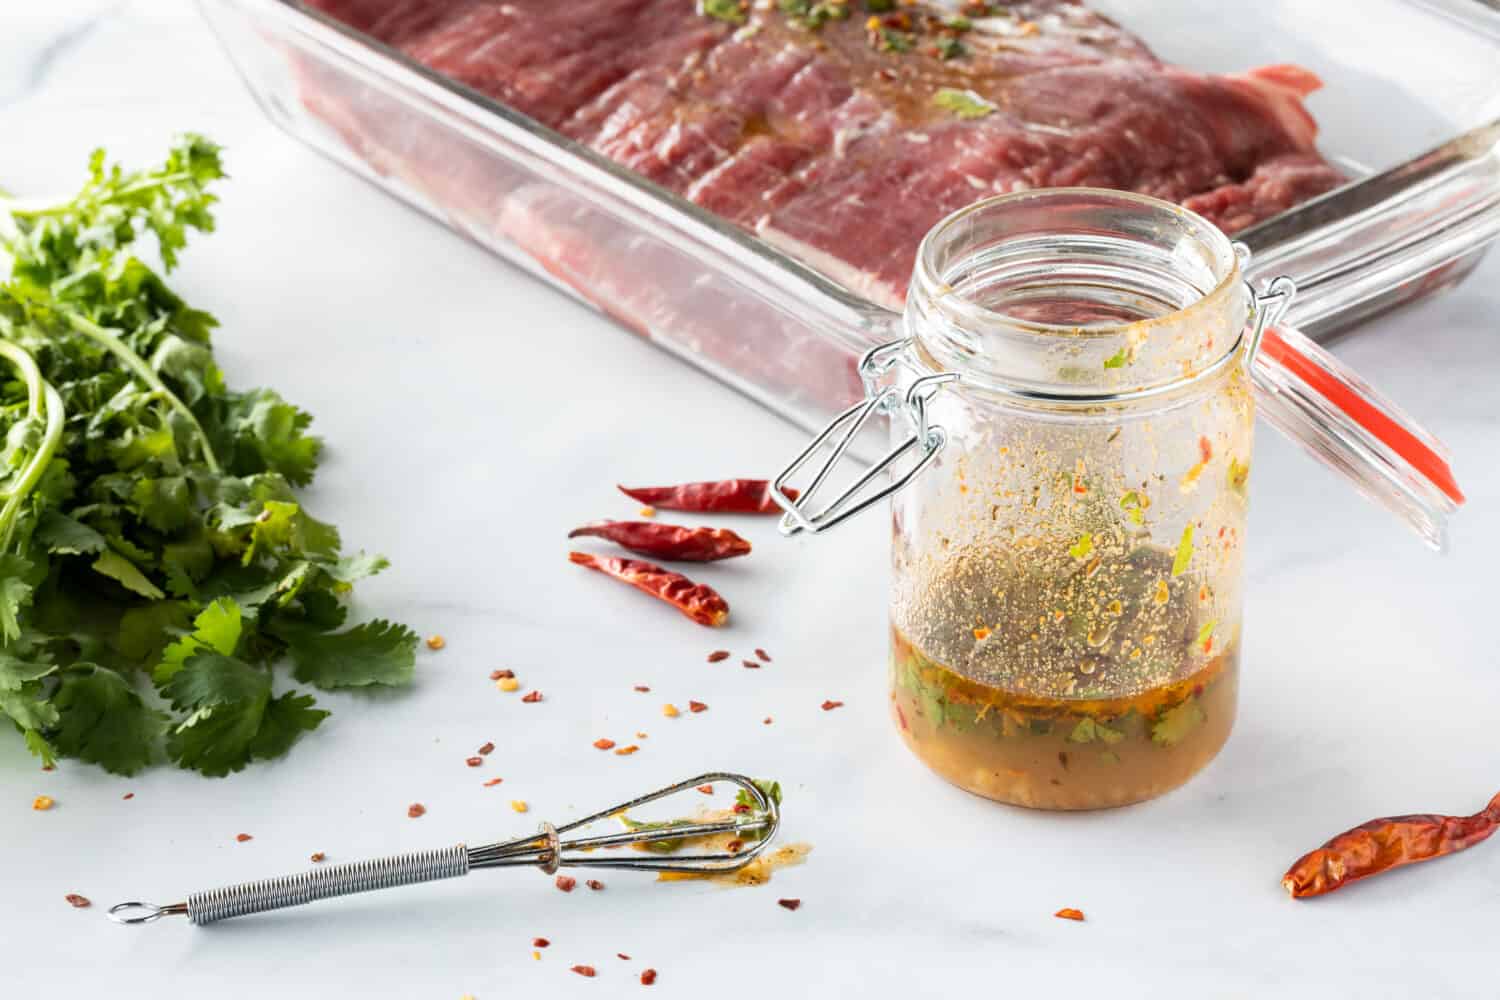 Close up of a jar of lime and cilantro marinade with cilantro herb on the side, and a flank of raw beef in behind.